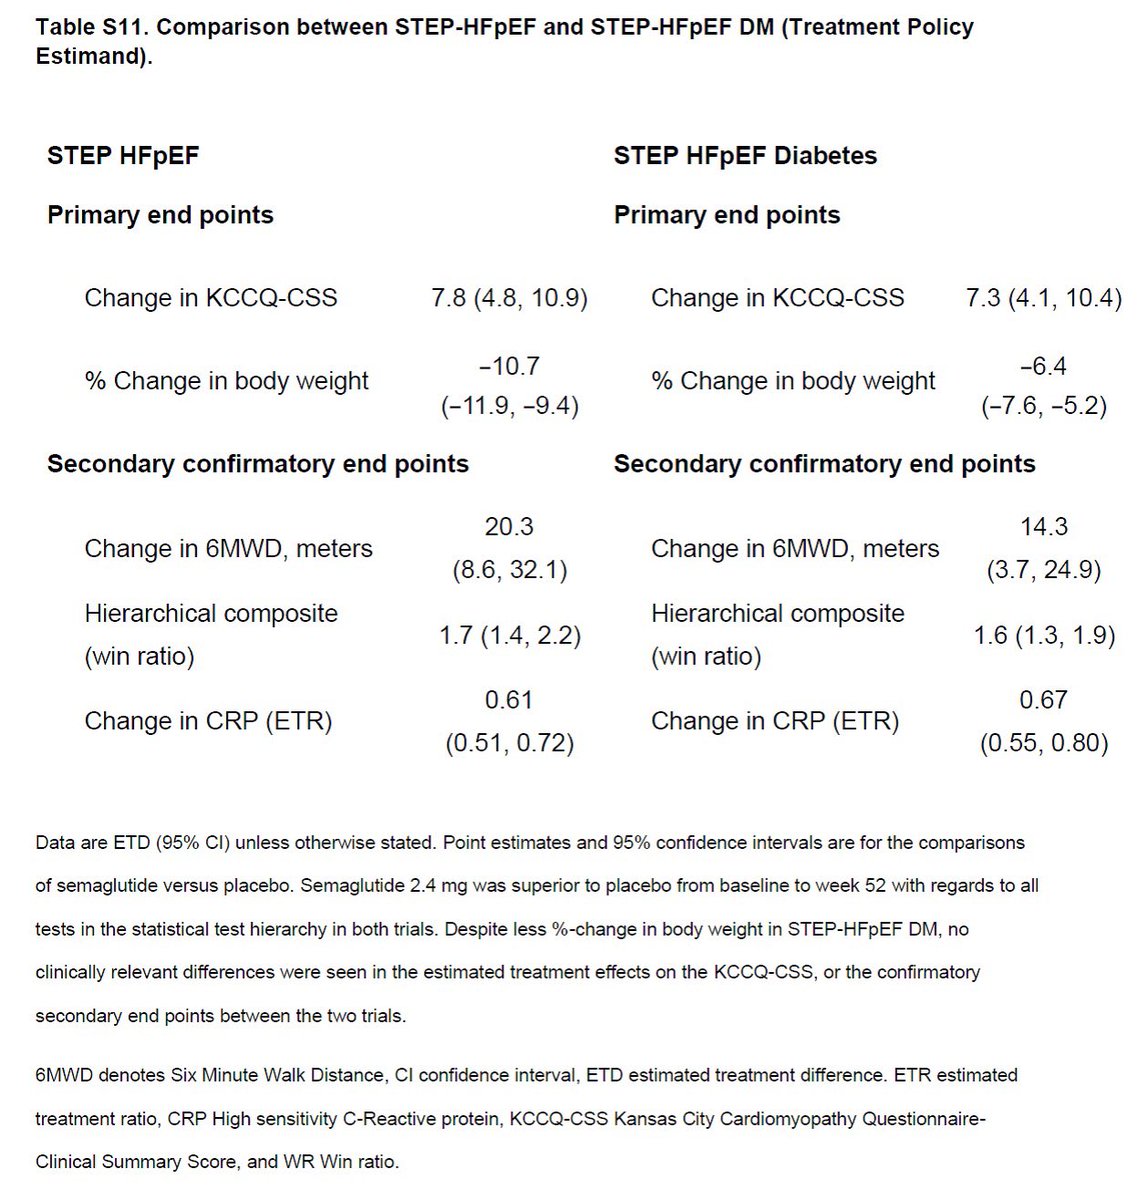 Comparison of findings in STEP HFpEF and STEP HFpEF Diabetes